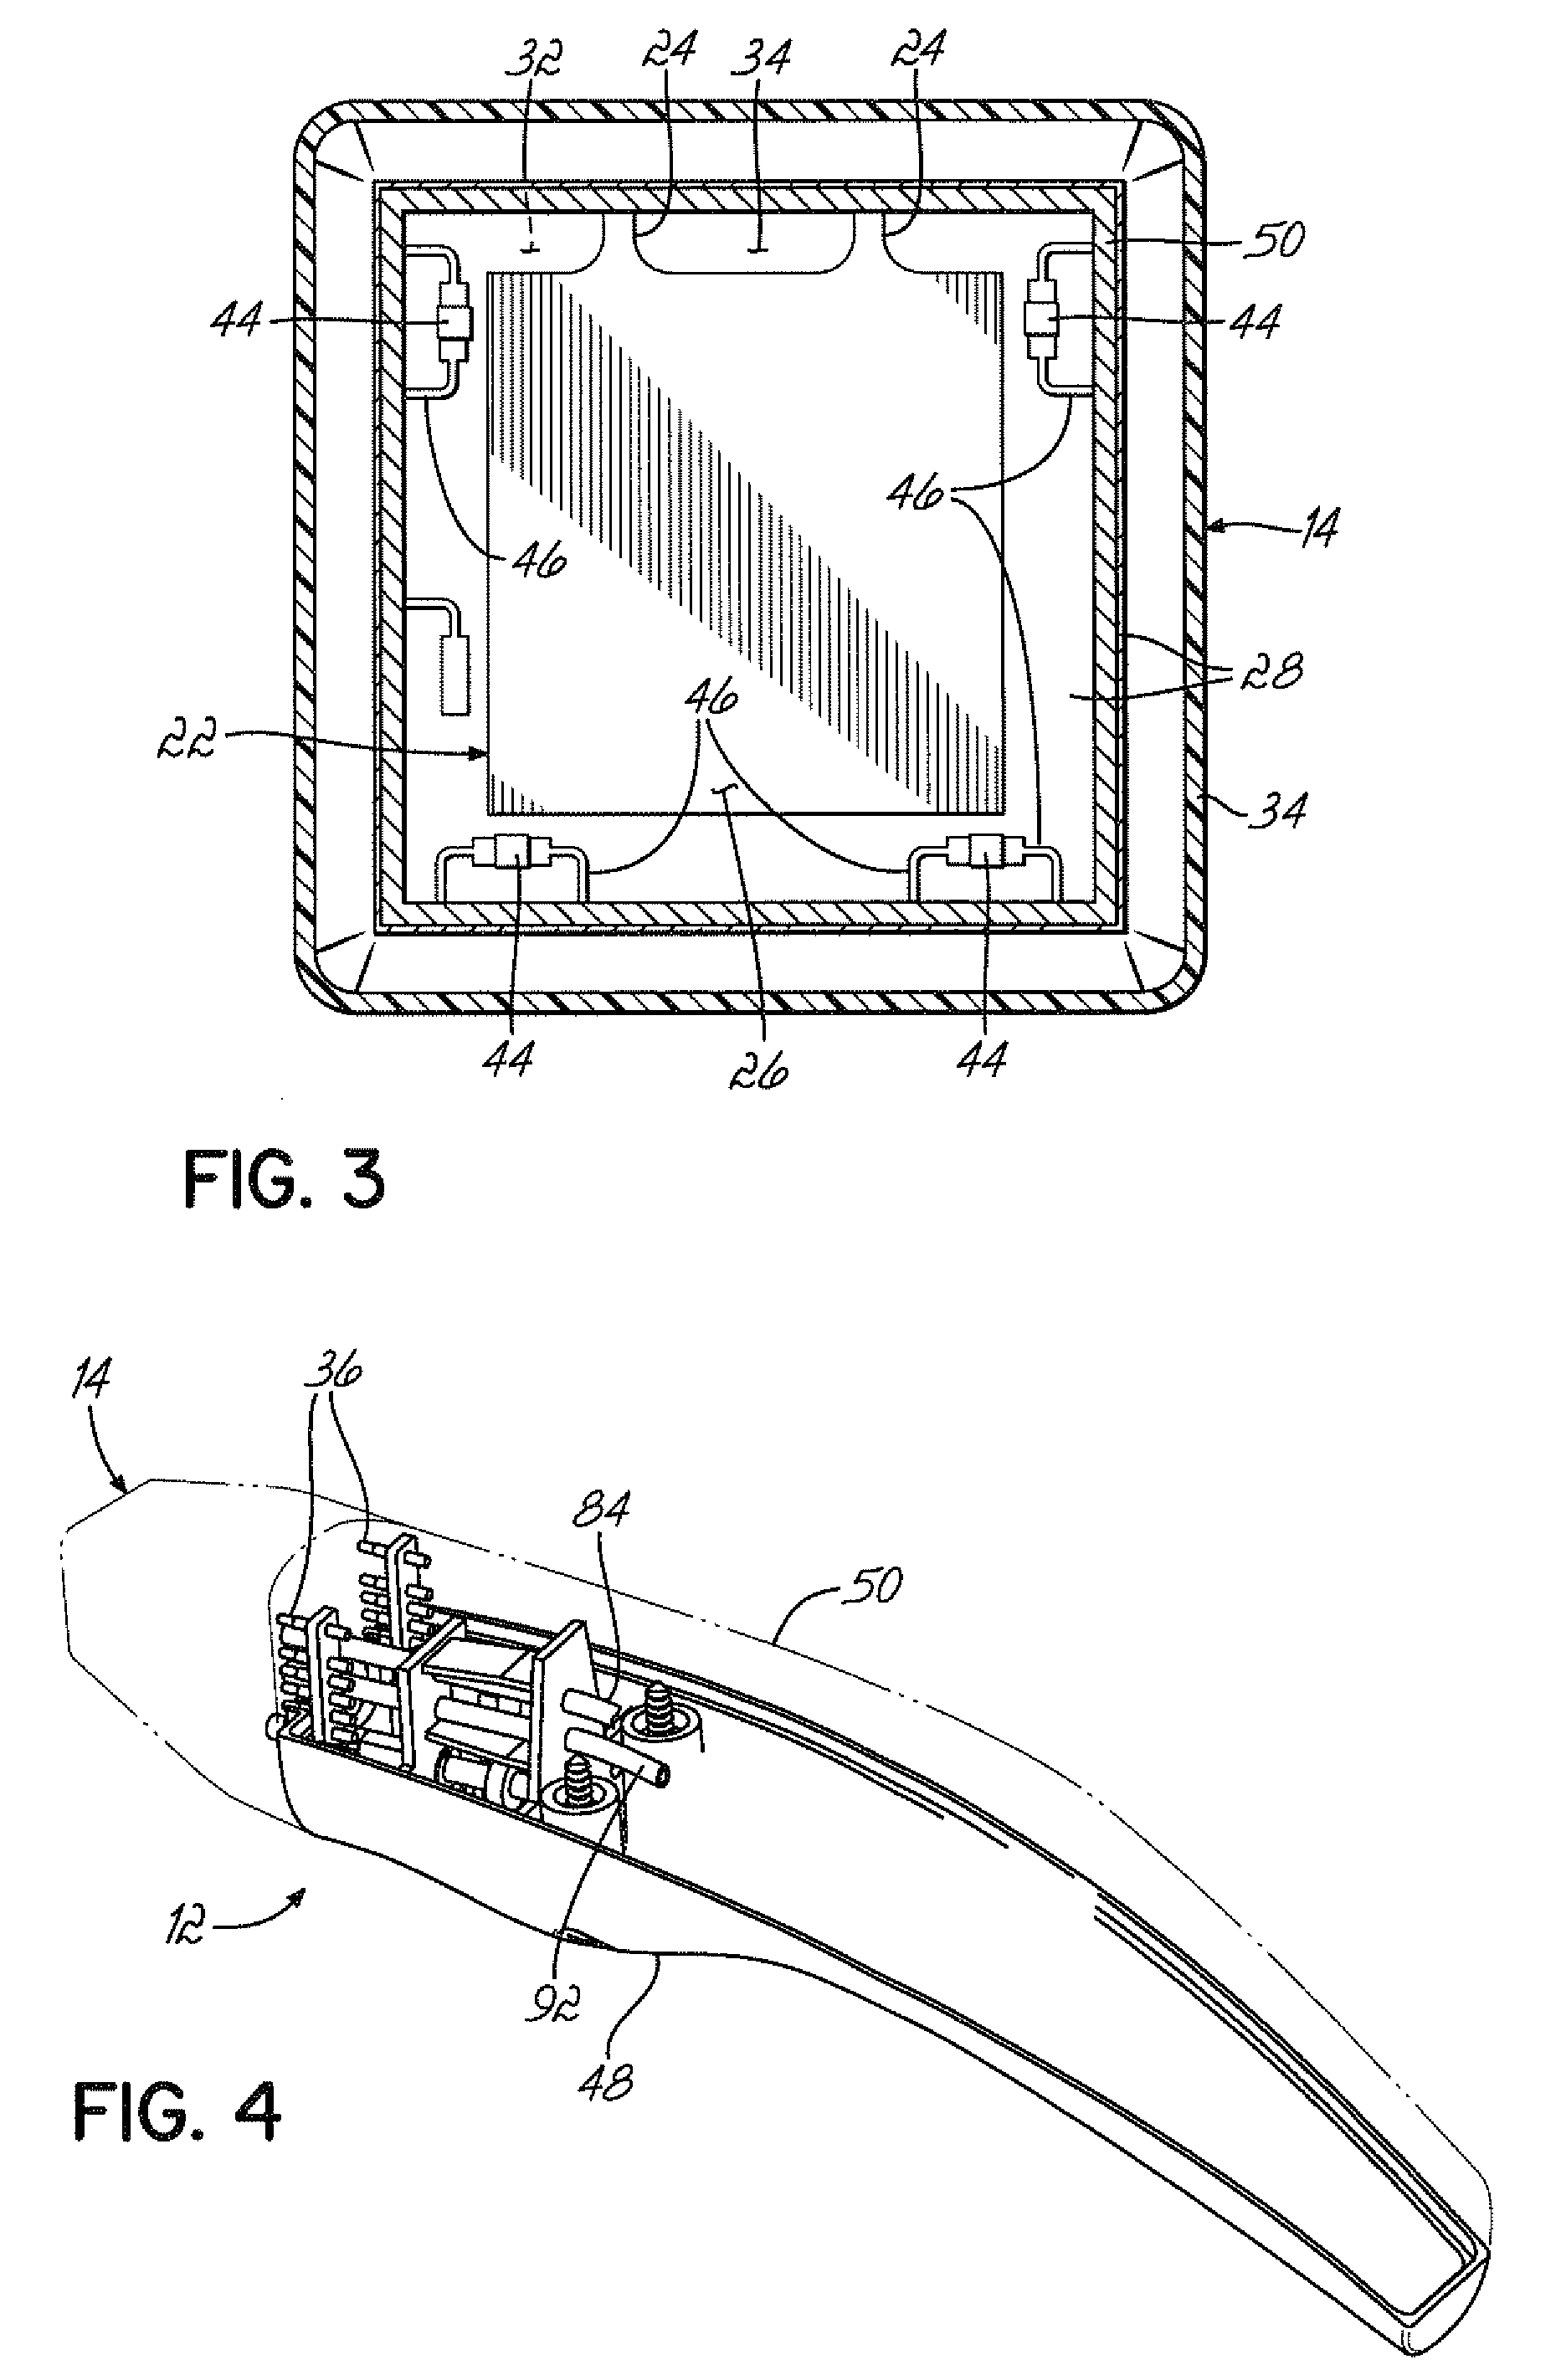 Methods and apparatus for predictively controlling the temperature of a coolant delivered to a treatment device